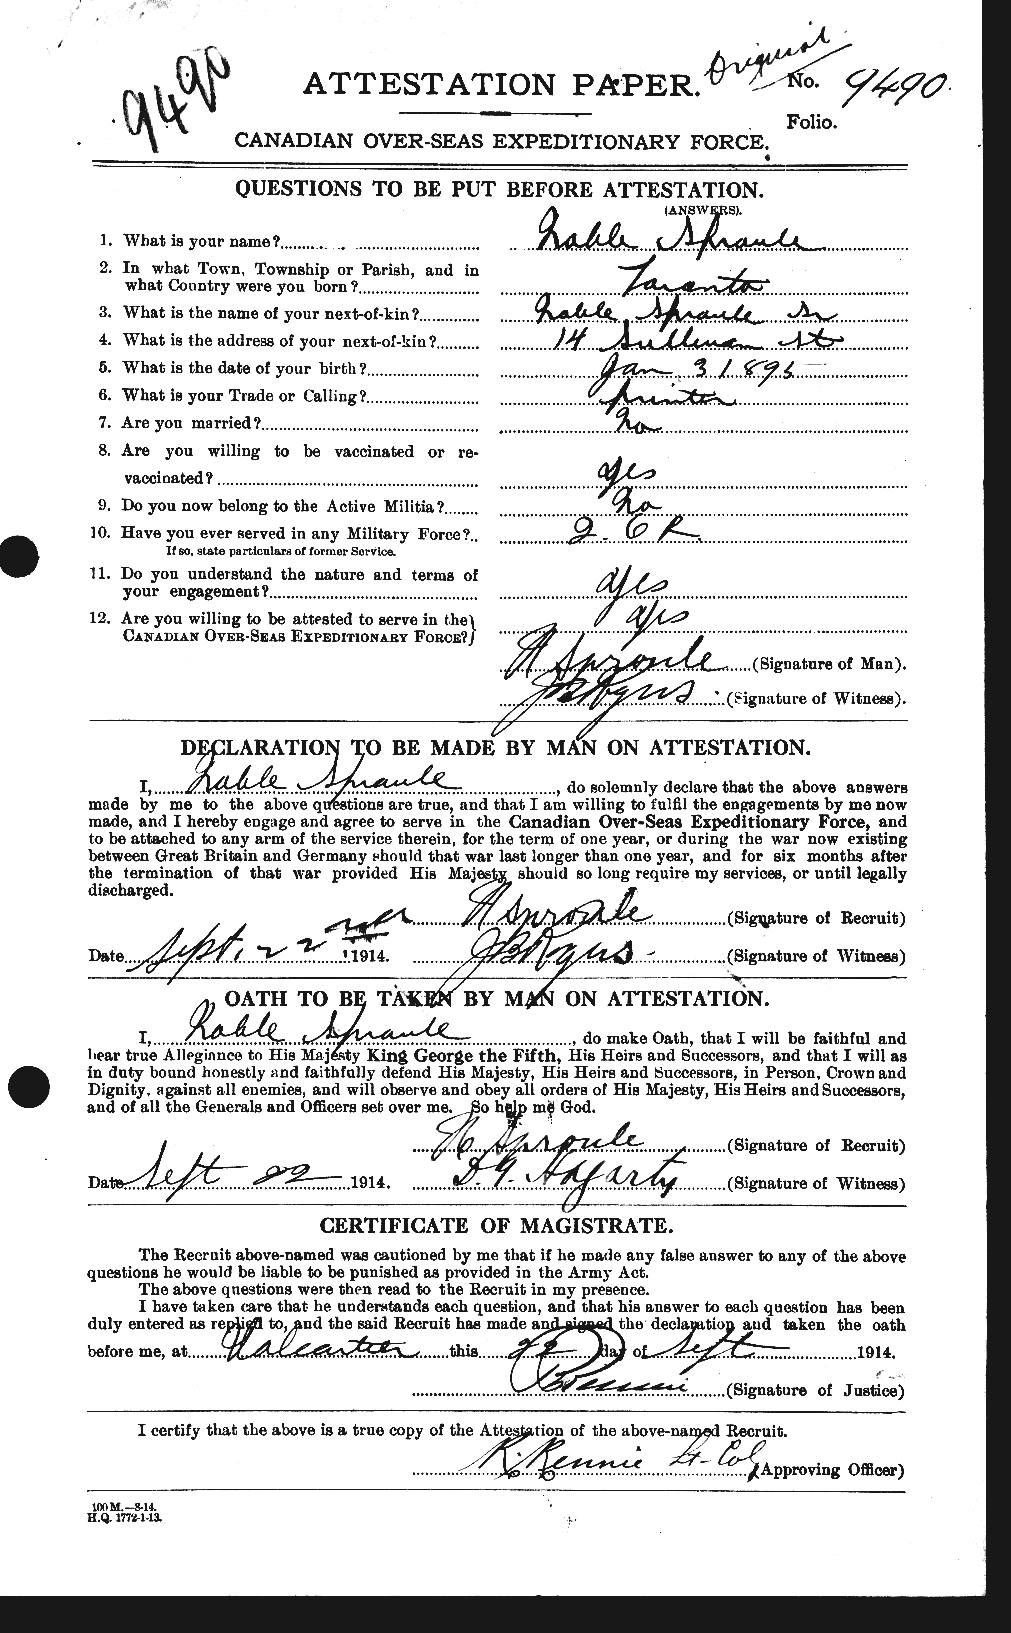 Personnel Records of the First World War - CEF 111913a